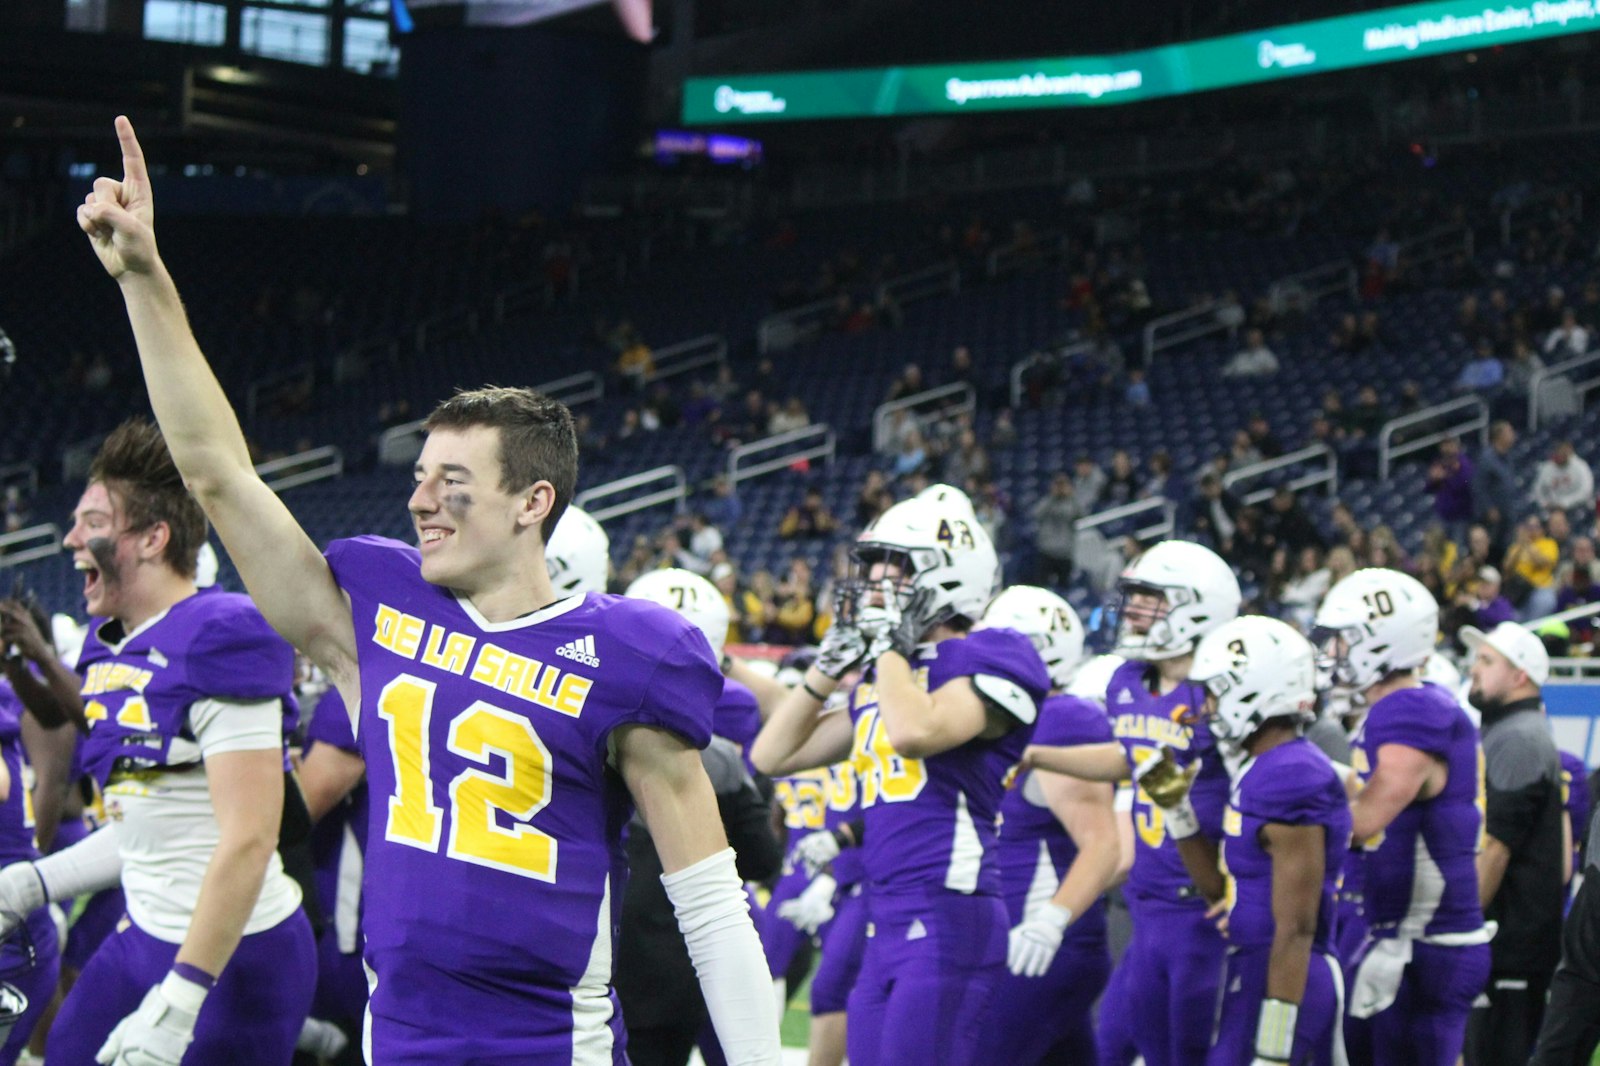 Quarterback Brady Drogosh (12) paced De La Salle’s offense by throwing three touchdown passes and rushing for another, for a total of 316 yards.